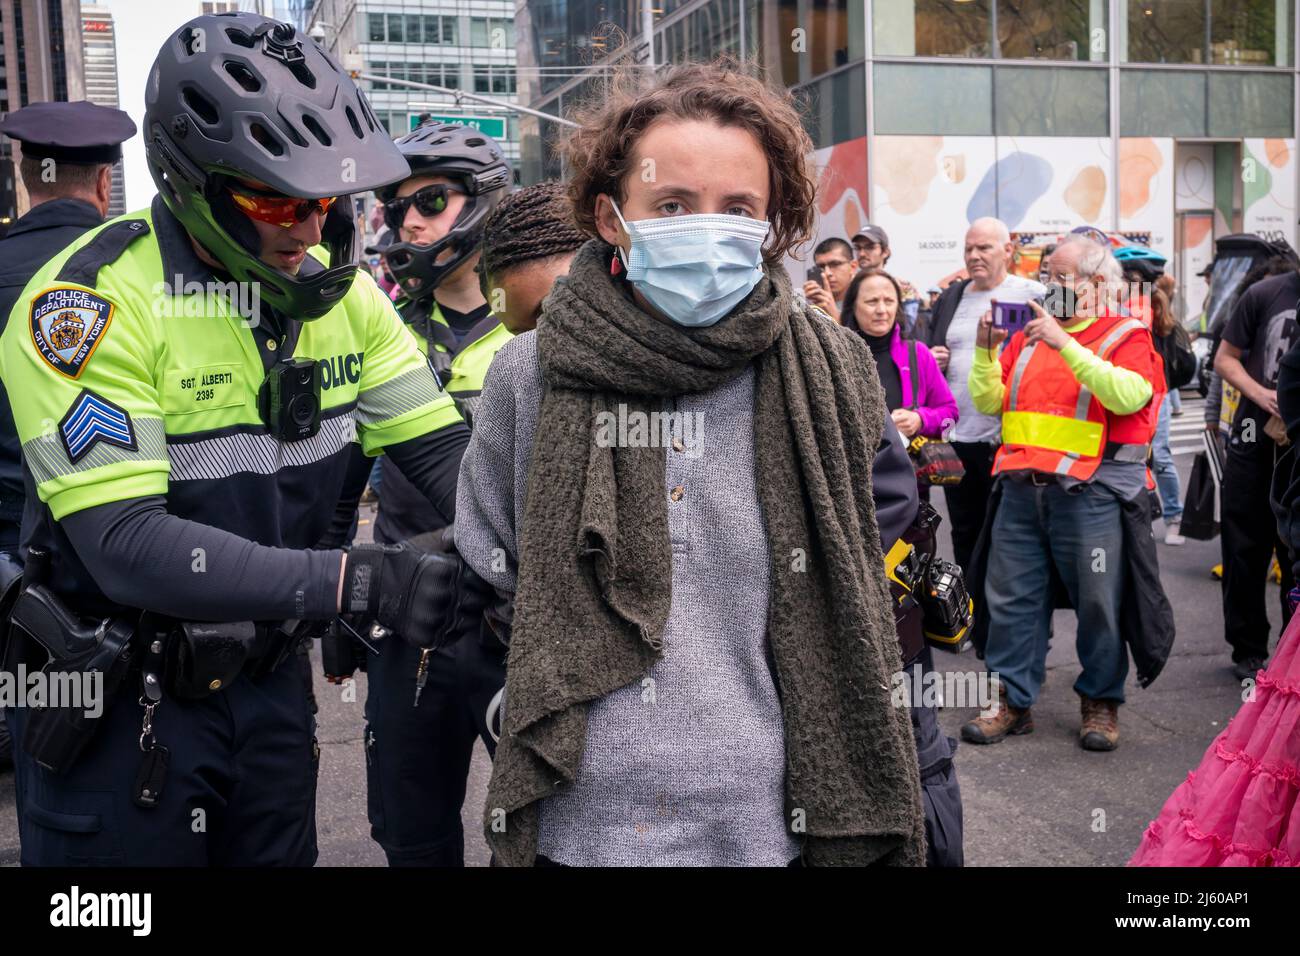 Environmental activists affiliated with Extinction Rebellion perform civil disobedience by blocking traffic on Sixth Avenue in New York on Saturday, April 23, 2022. The protest called attention to the inactivity of government to stop climate catastrophe, the protesters were subsequently arrested(© Richard B. Levine) Stock Photo